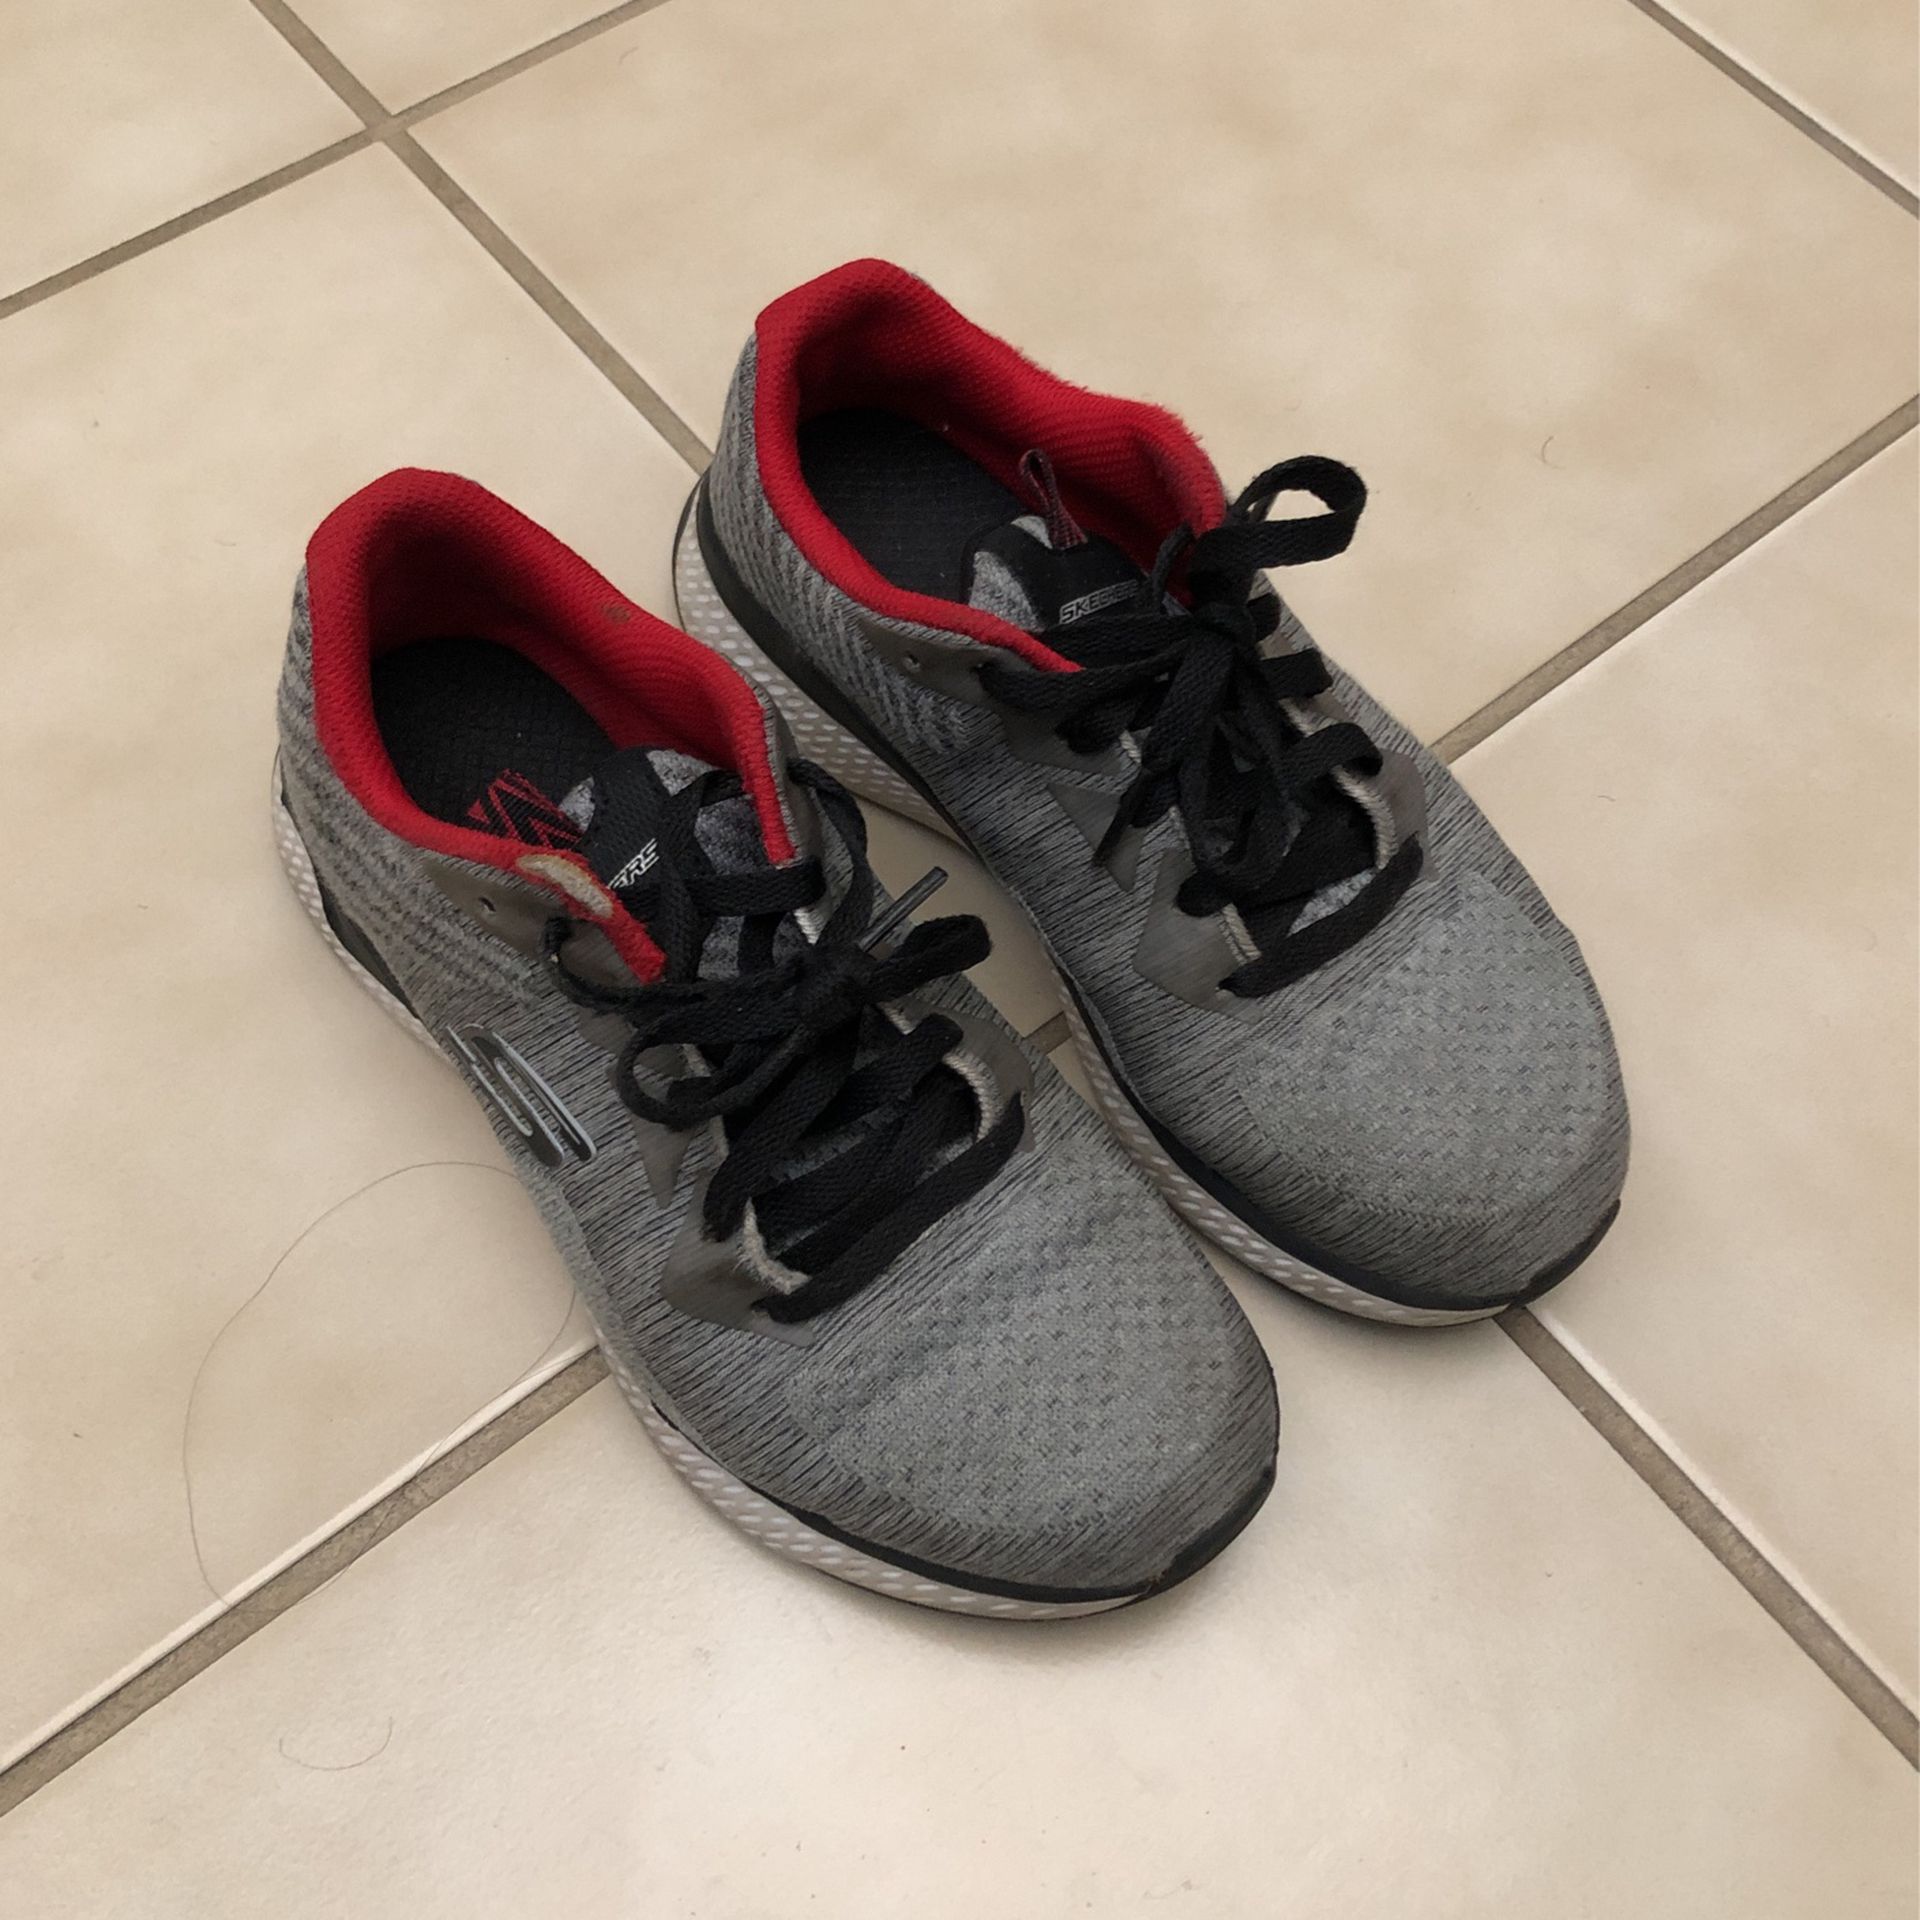 Skechers shoes size 4 for Sale in CA - OfferUp